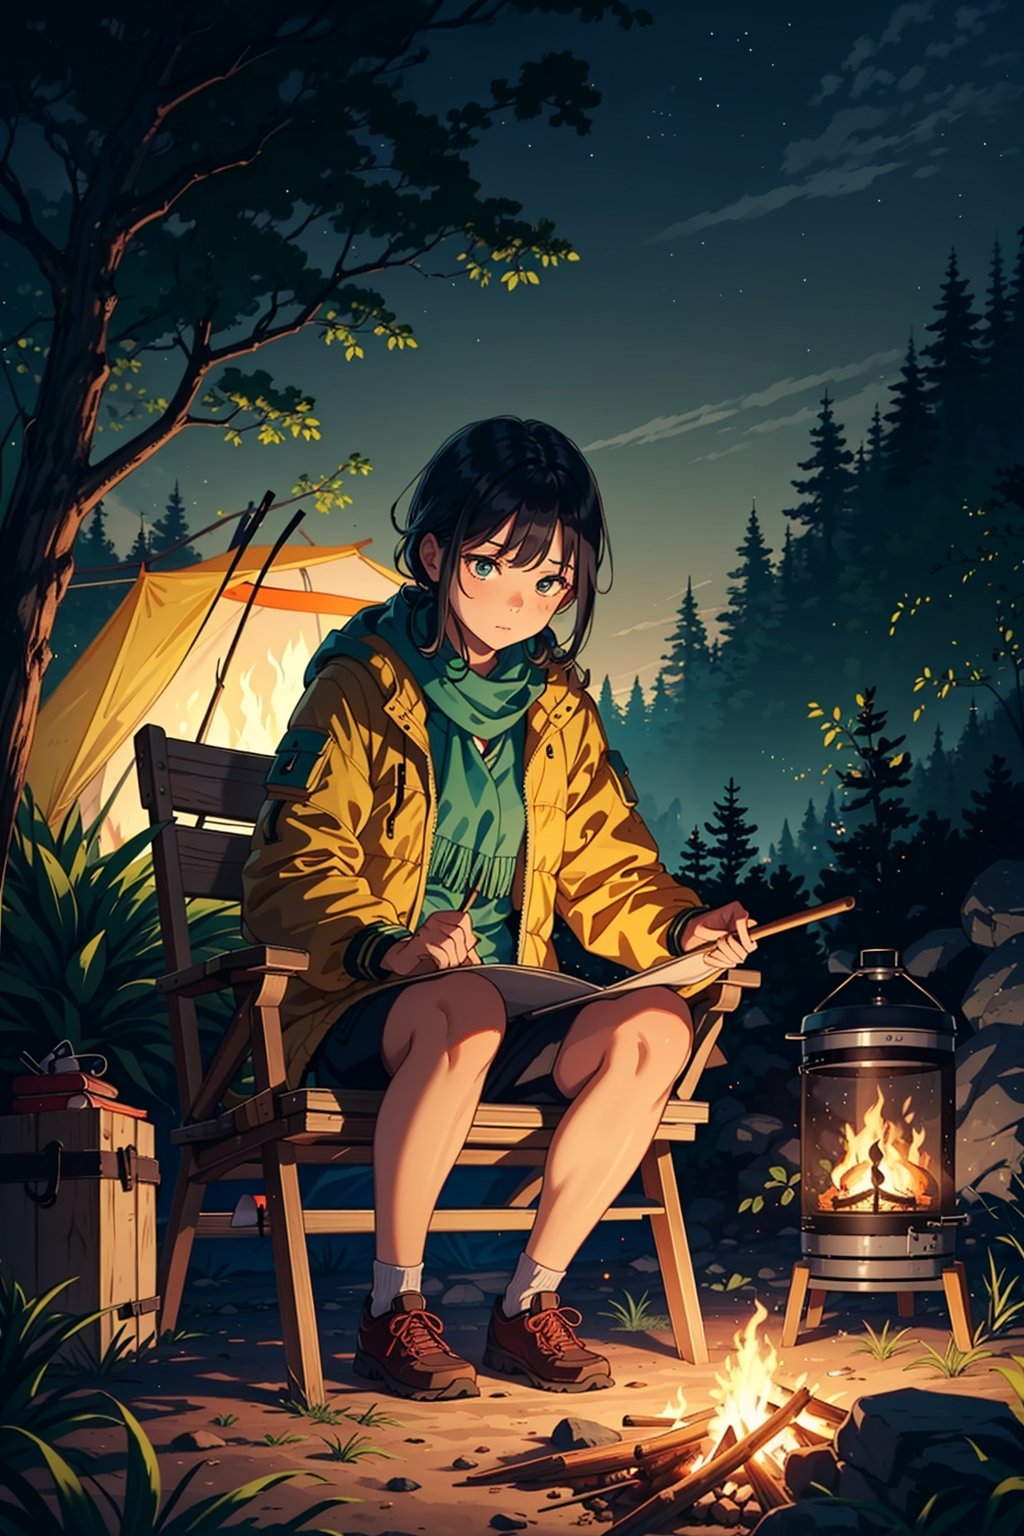 camping night, one girl sitting on a log, there’s a campfire nearby, she is roasting marshmallow with a stick, nighttime, dim and calming atmosphere, lush green woods, wearing camping clothes with jacket and scarf